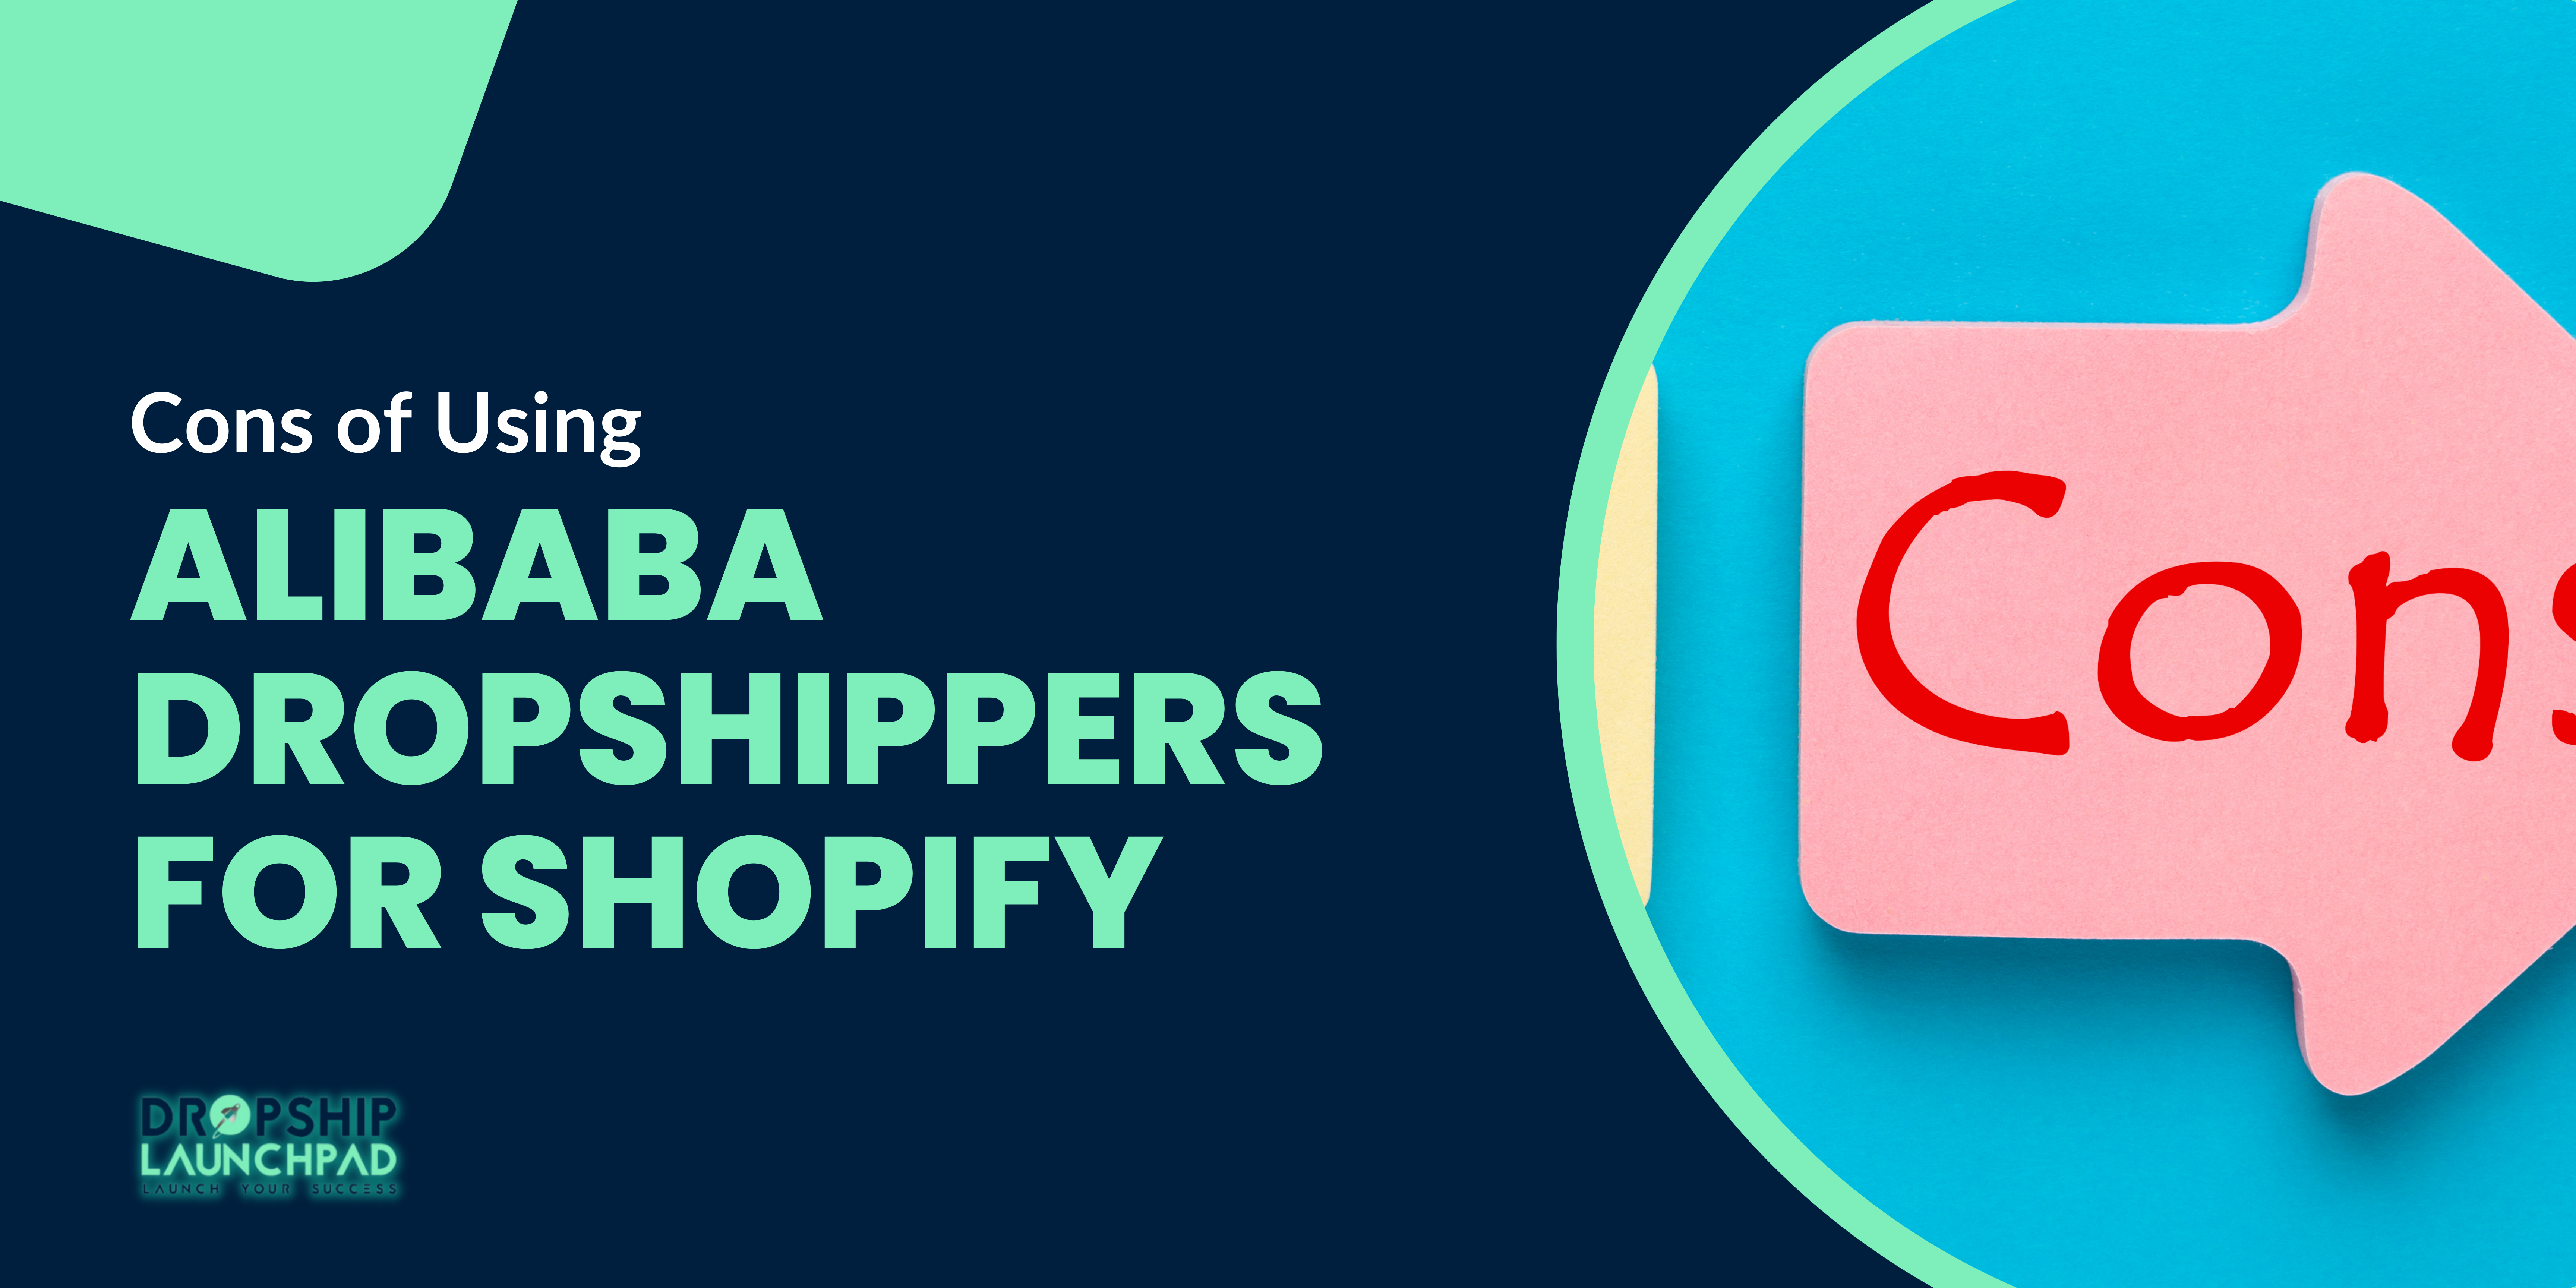 Cons of Using Alibaba Dropshippers for Shopify